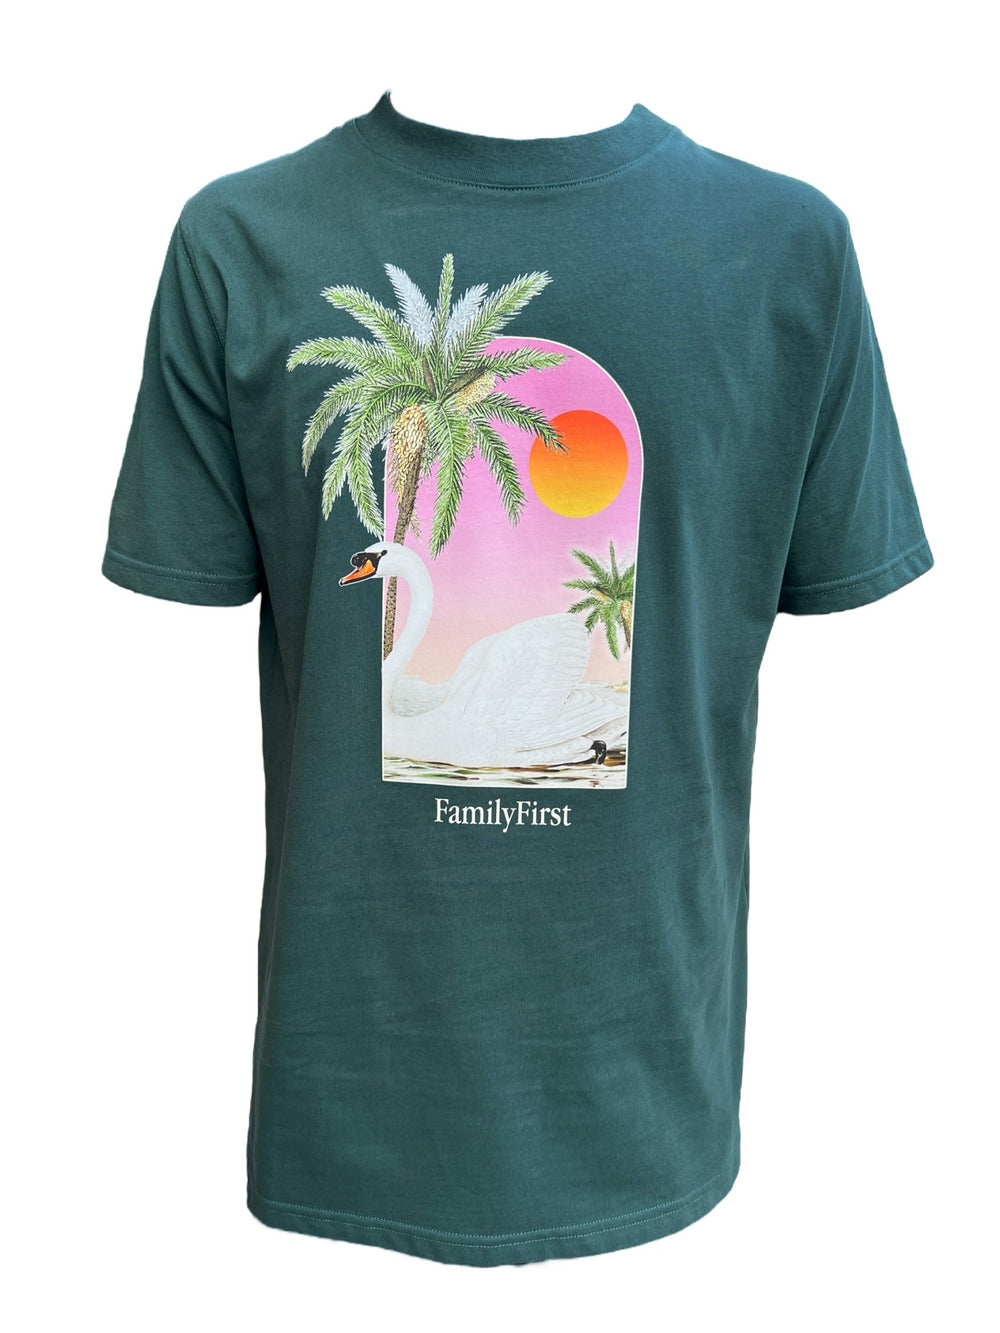 The FAMILY FIRST TS2407 T-SHIRT SWAN GR by FAMILY FIRST is a green short-sleeve graphic t-shirt featuring a printed design of a swan, palm trees, and a sunset, with "FAMILY FIRST" proudly displayed below the image.